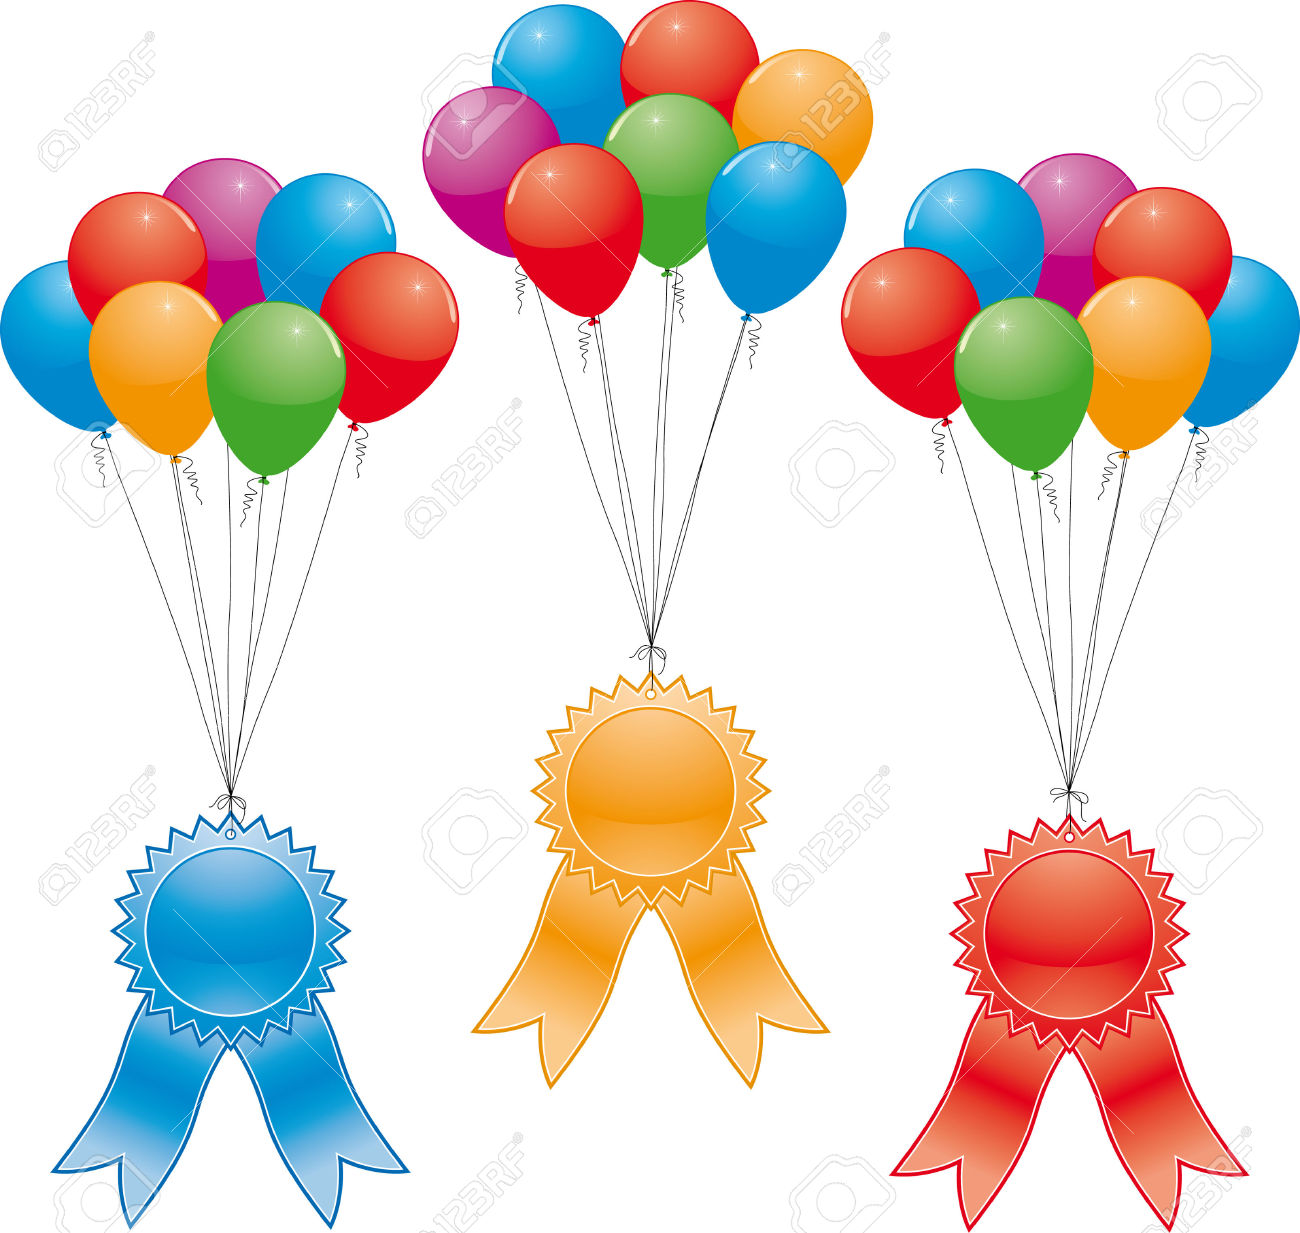 Free Award Ceremony Cliparts, Download Free Clip Art, Free